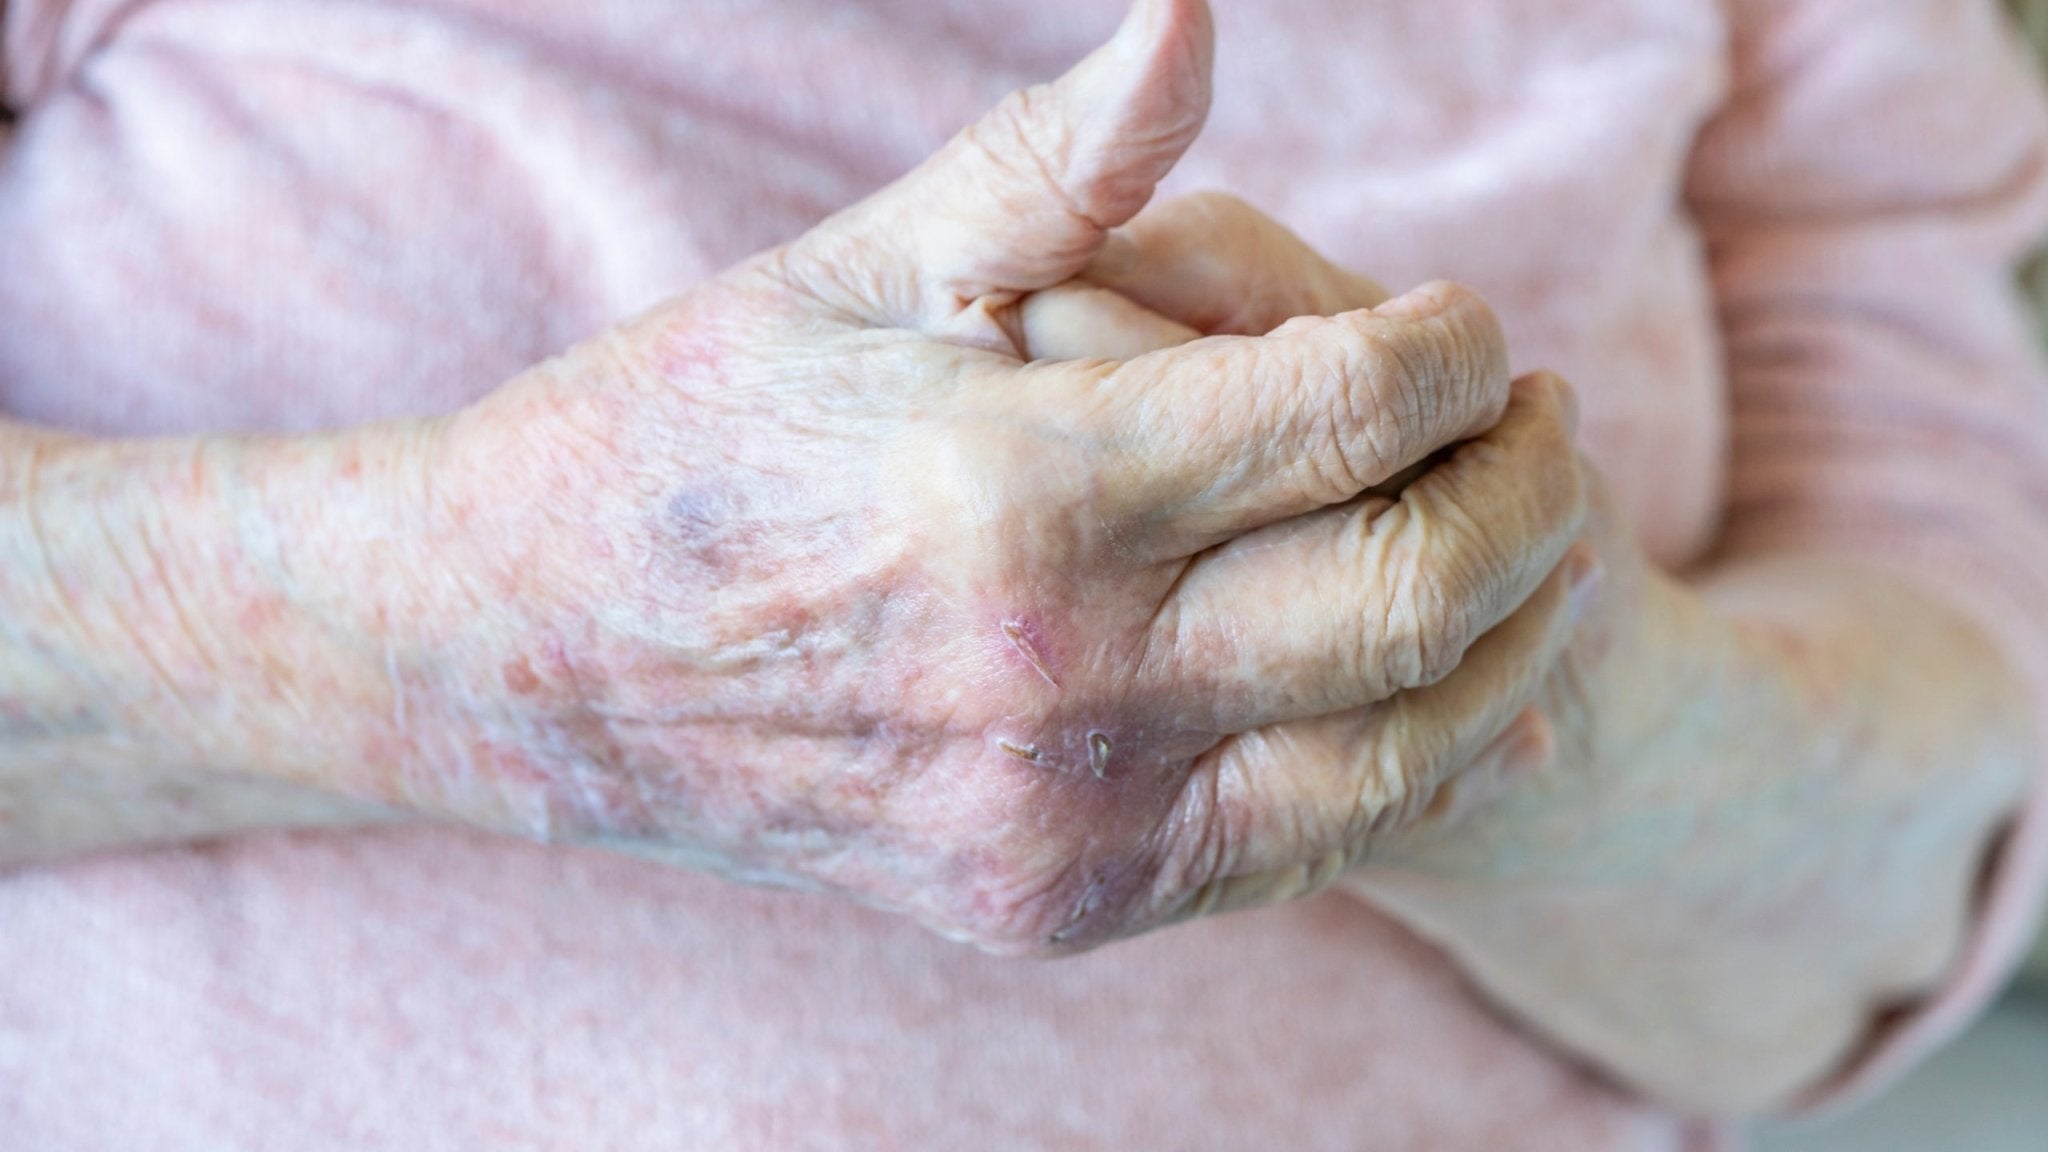 Eczema in Older Adults: Causes, Symptoms, and Treatment - Gladskin